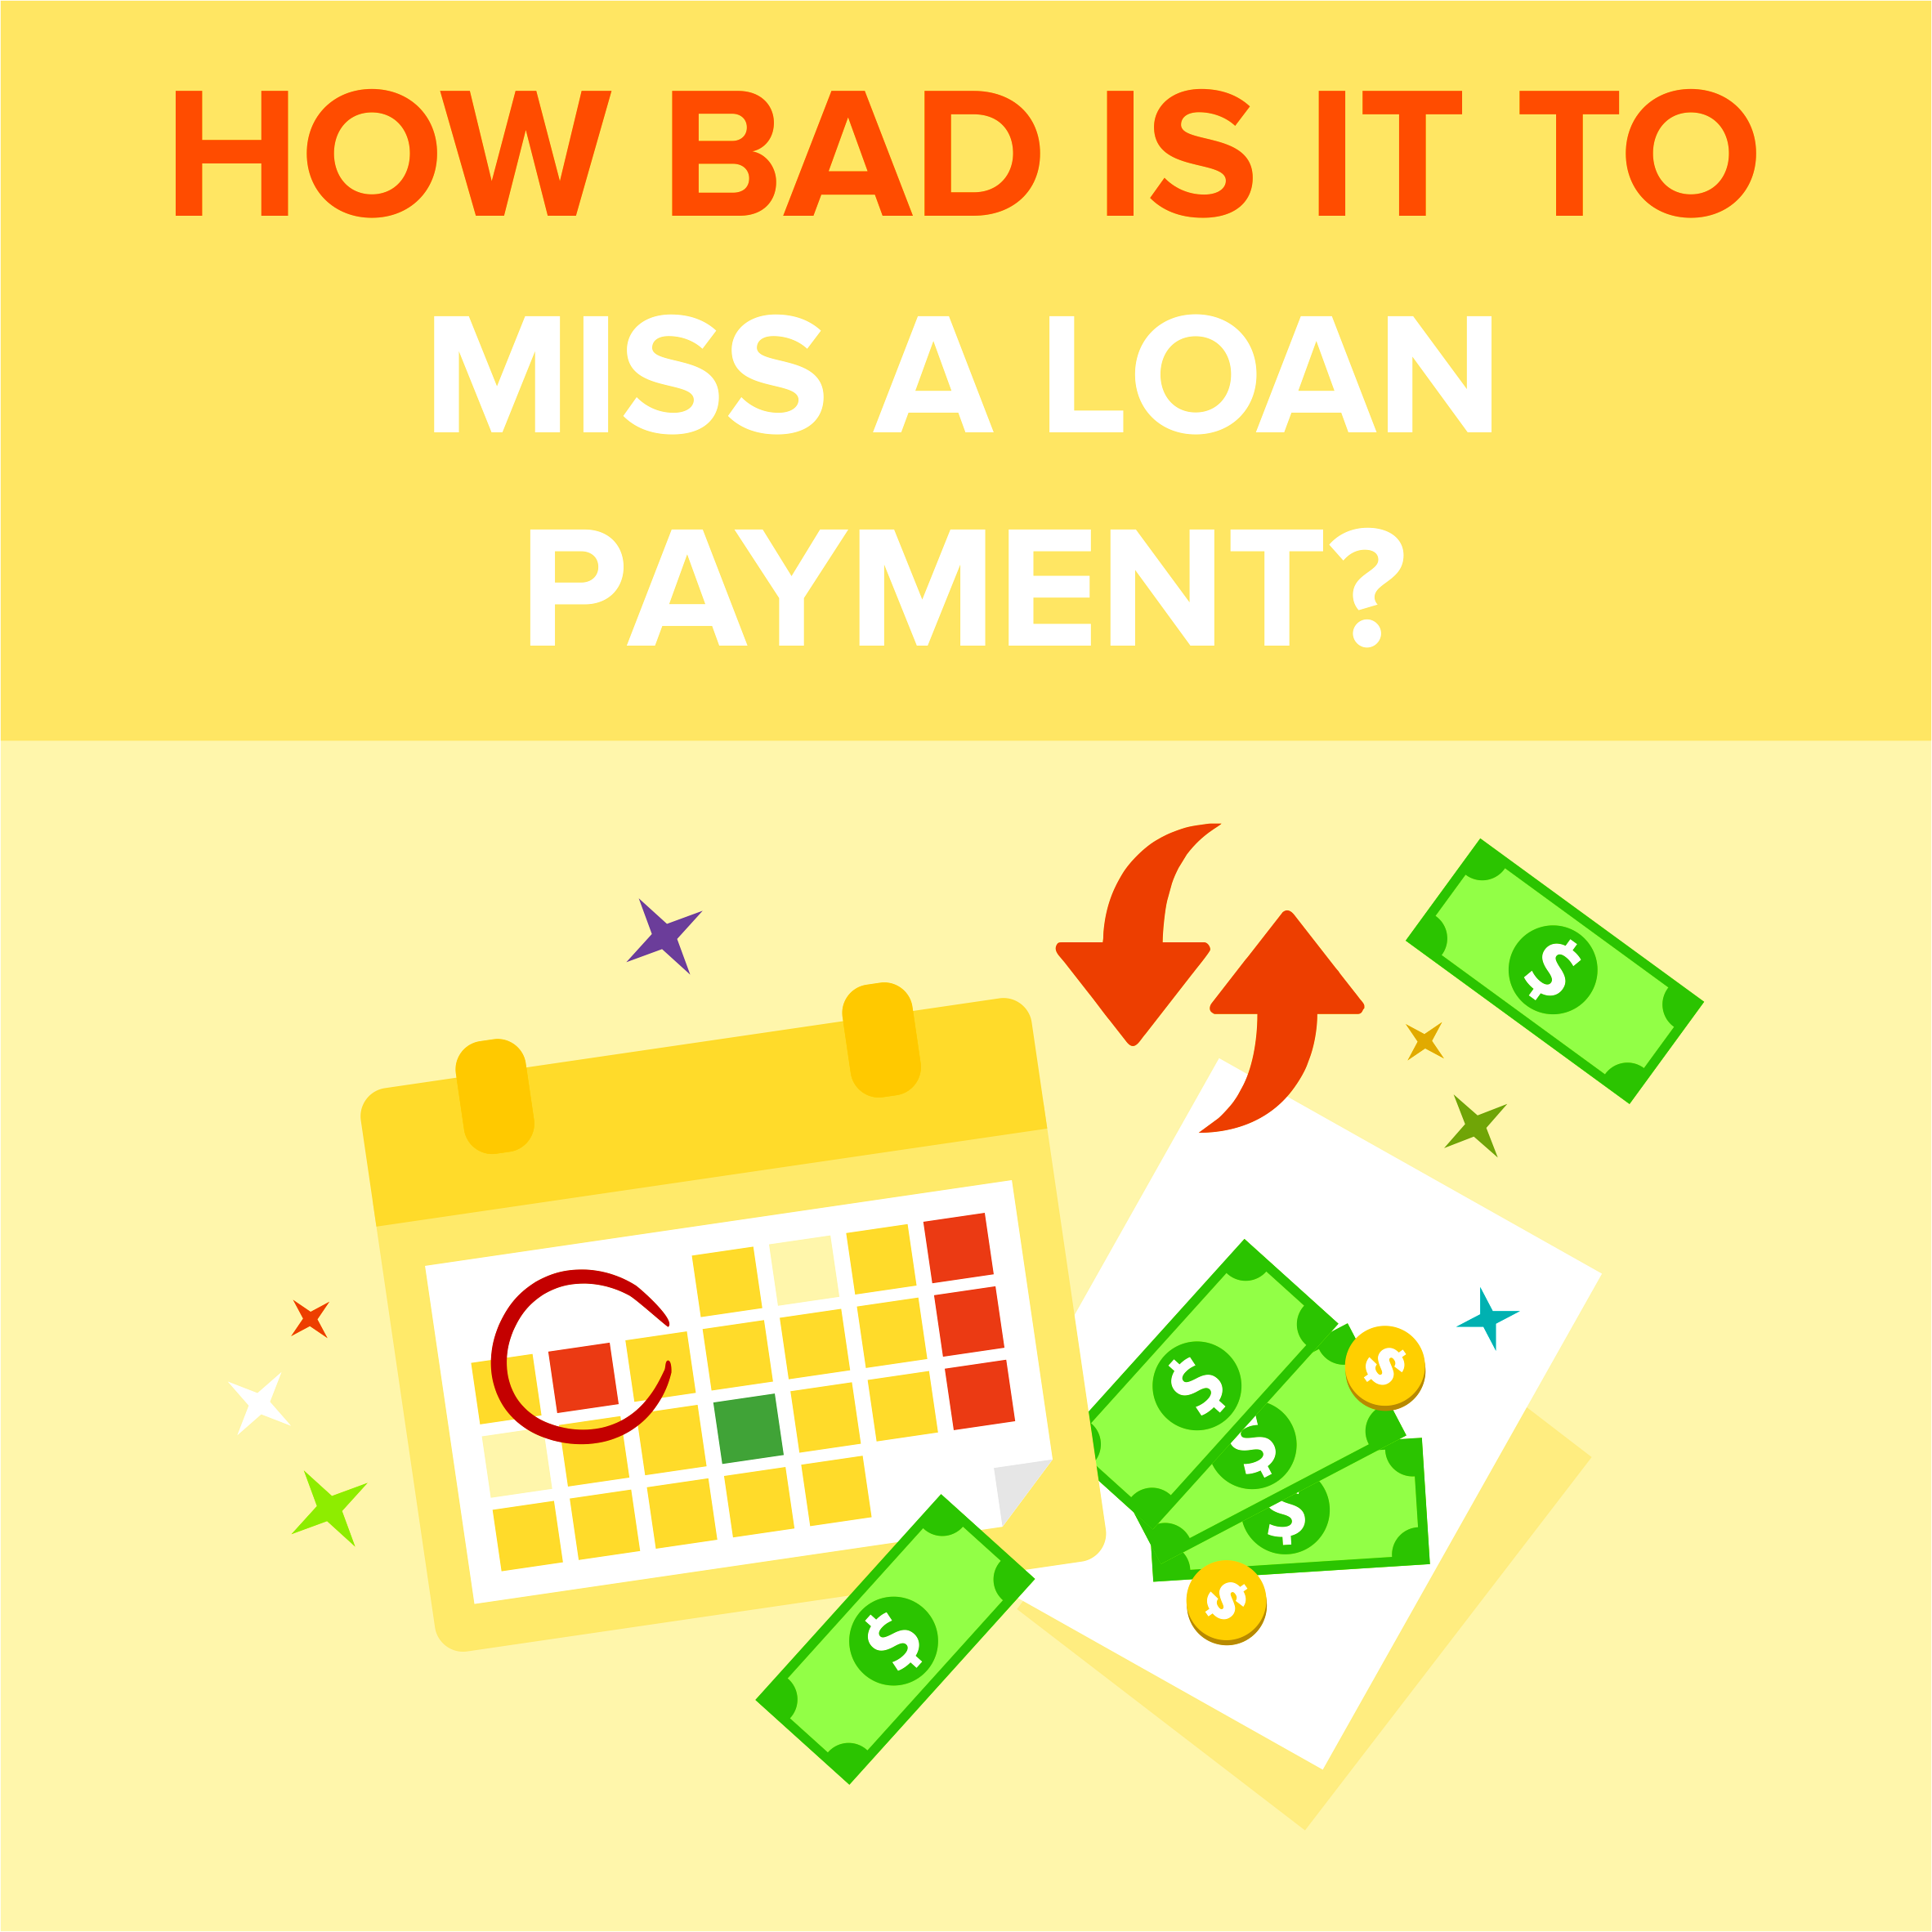 How Bad is it to Miss a Loan Payment?